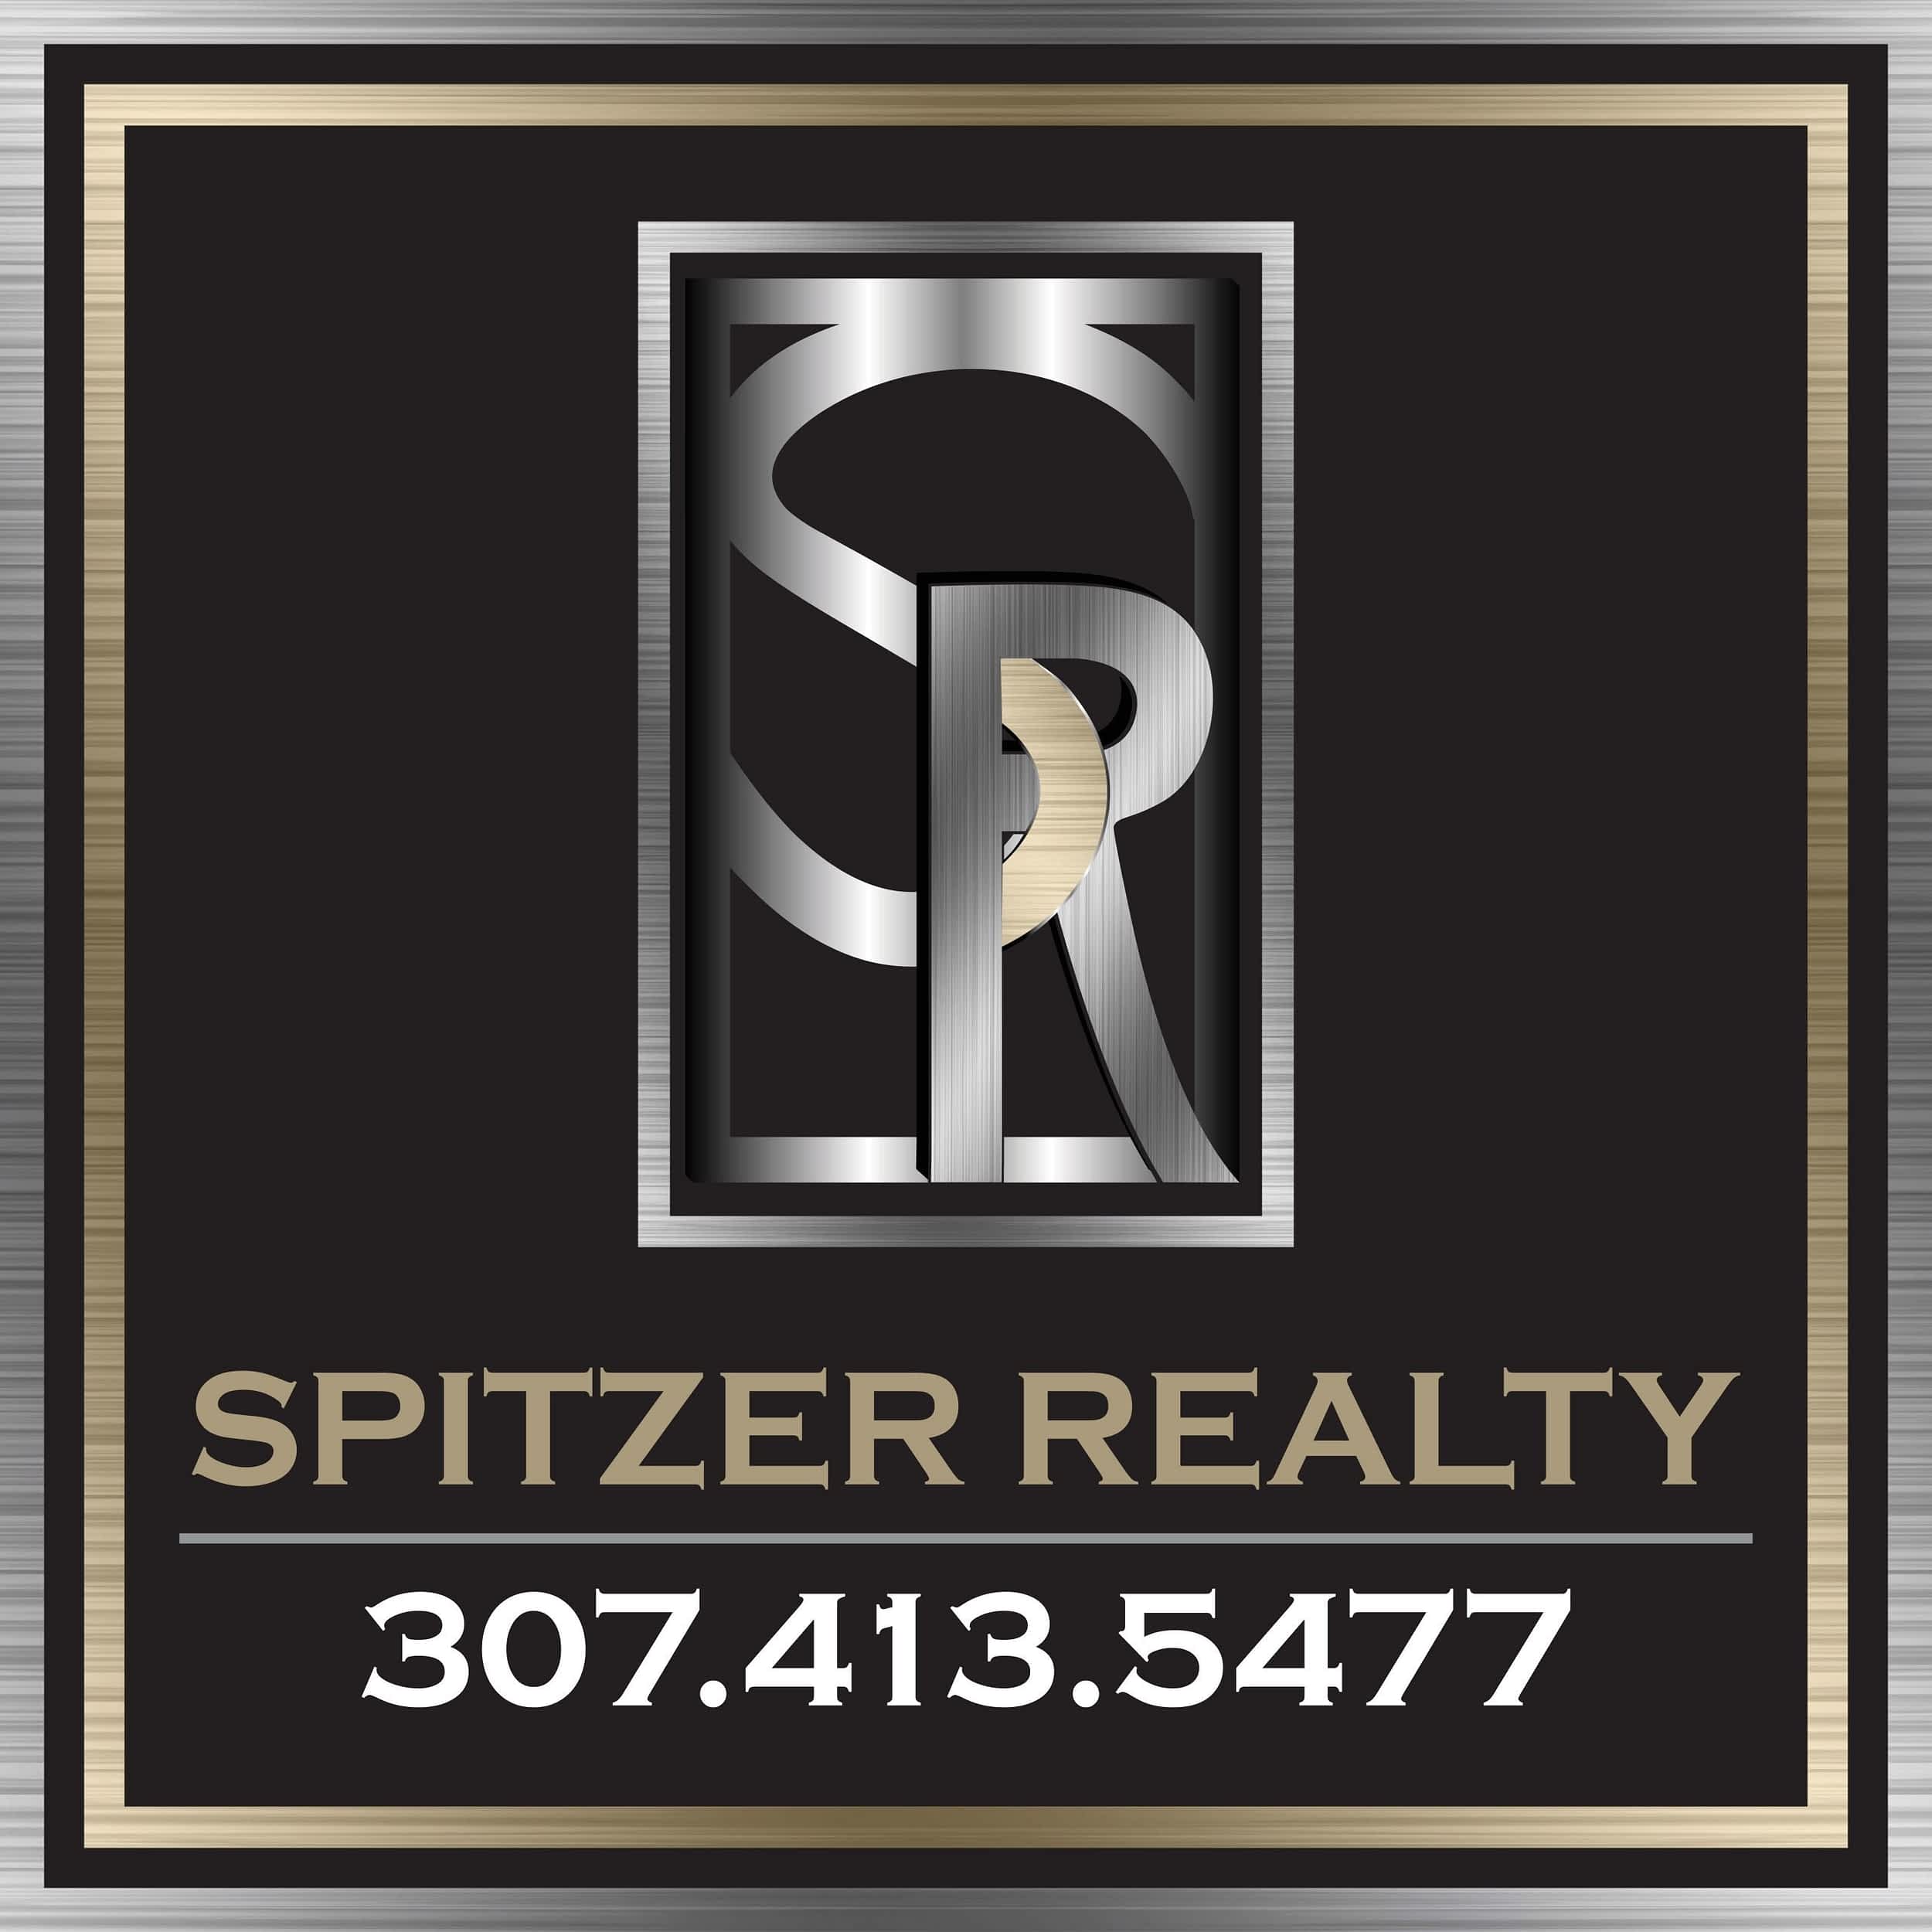 Spitzer Realty